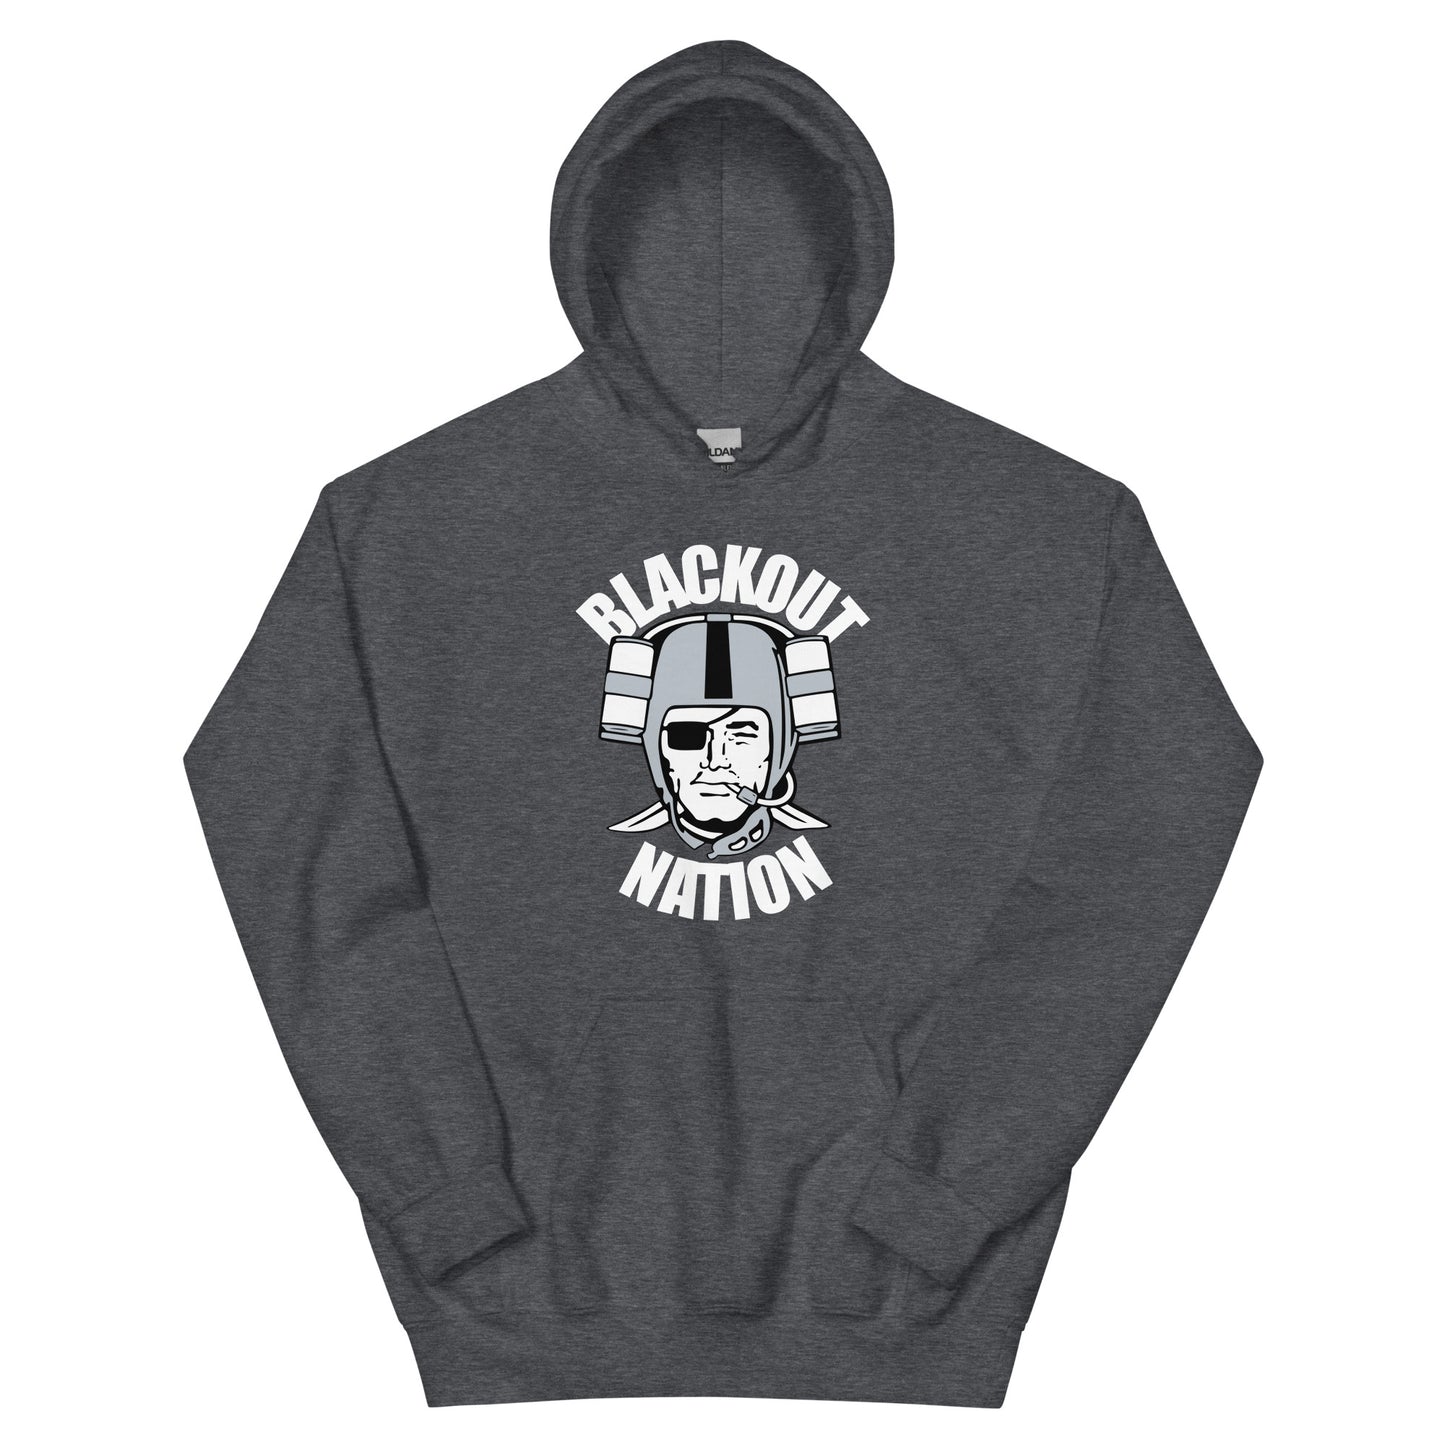 Blackout Nation Hoodie